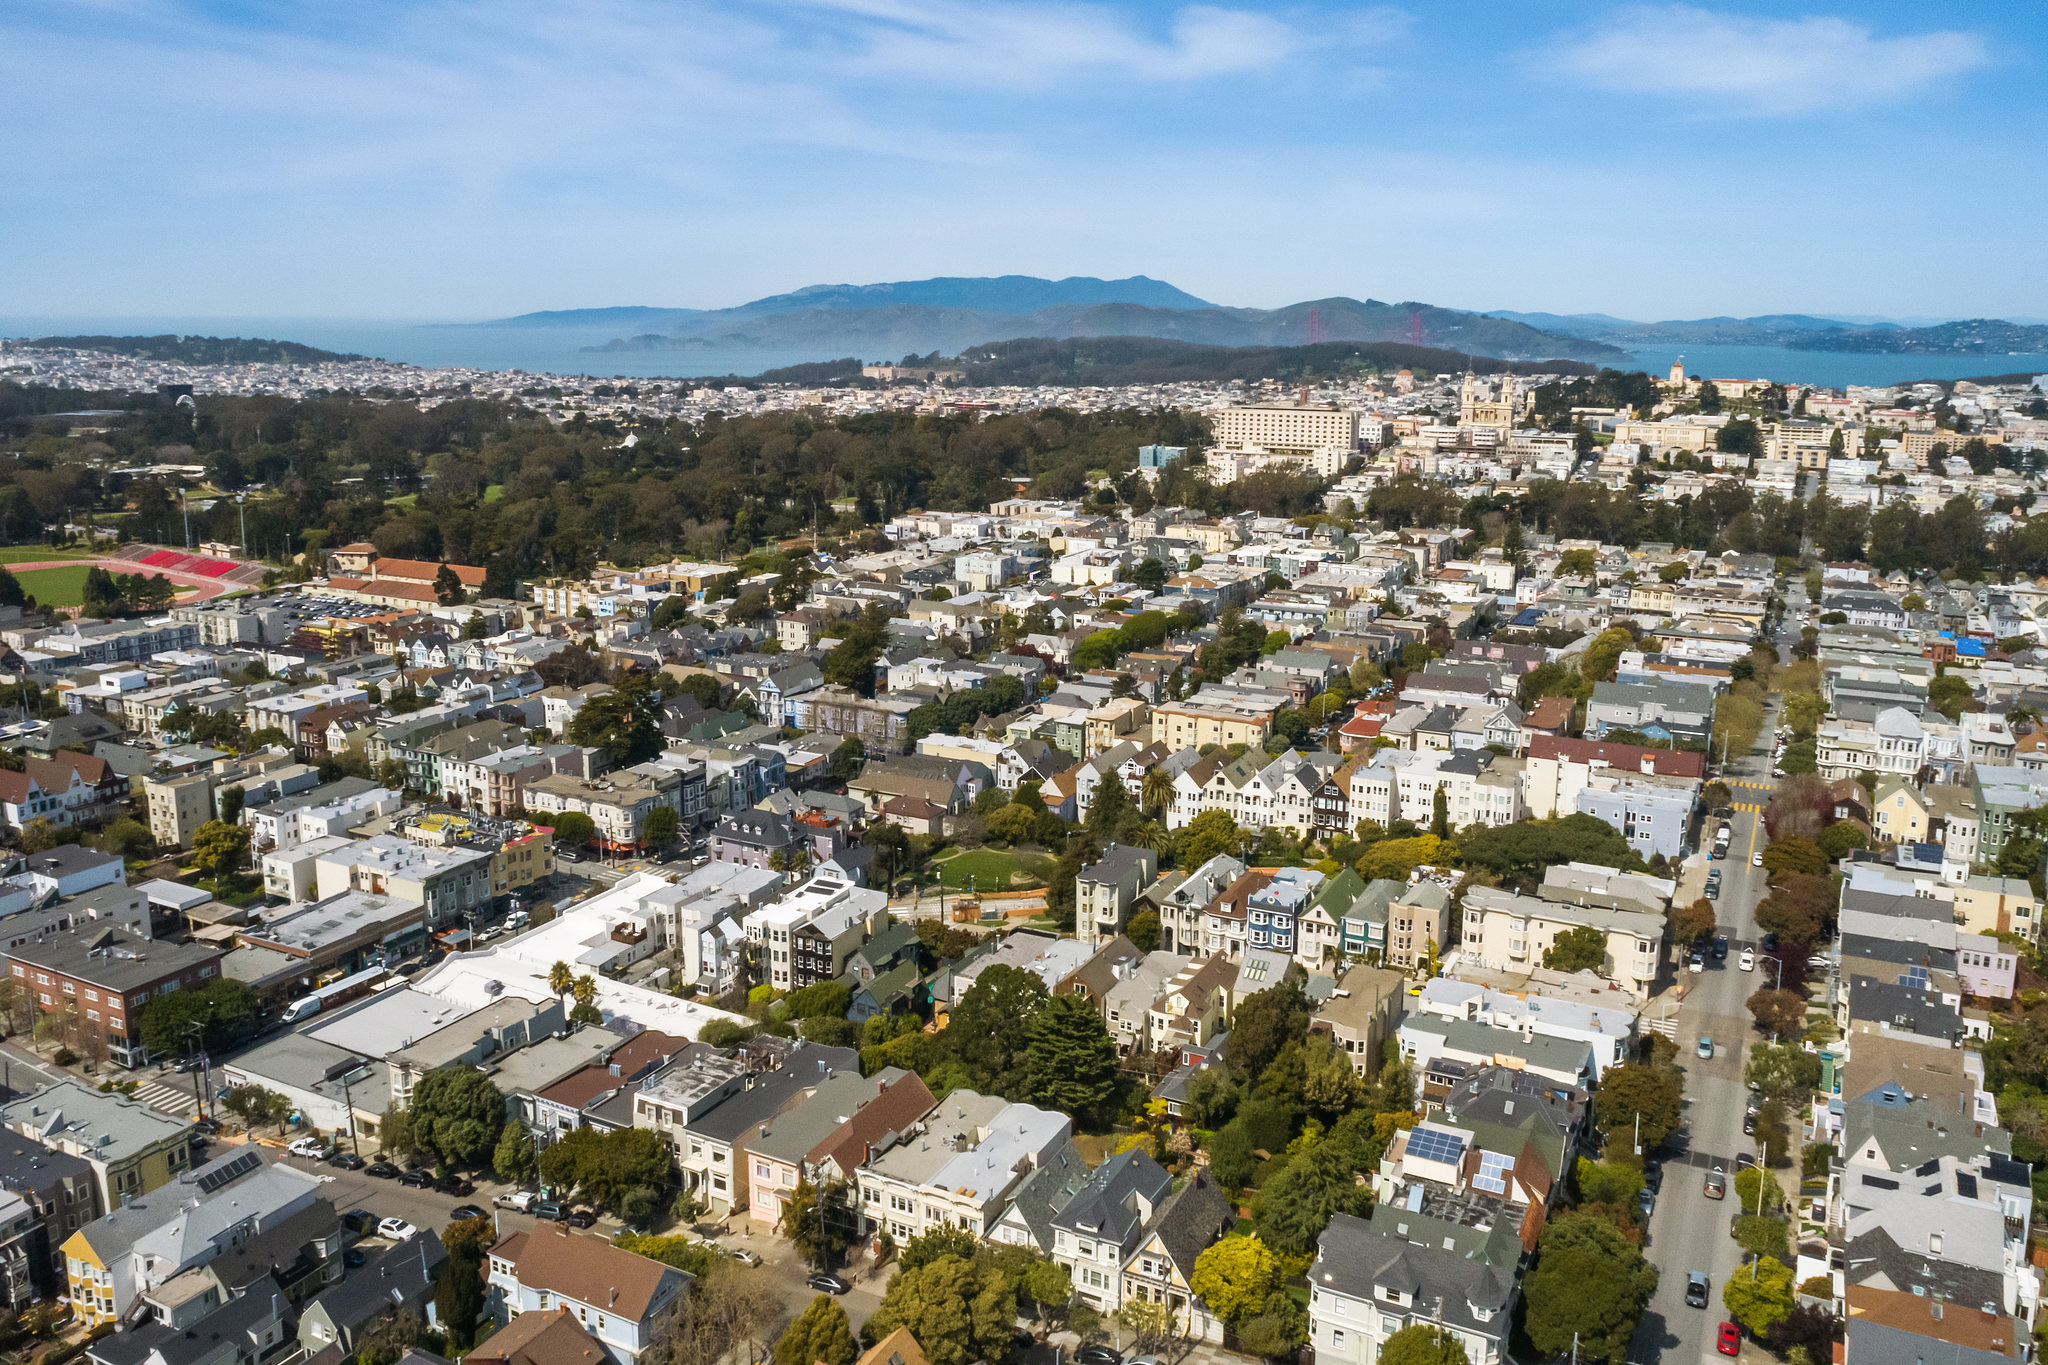 Property Photo: Aerial view of the neighborhood and proximity to the San Francisco Bay